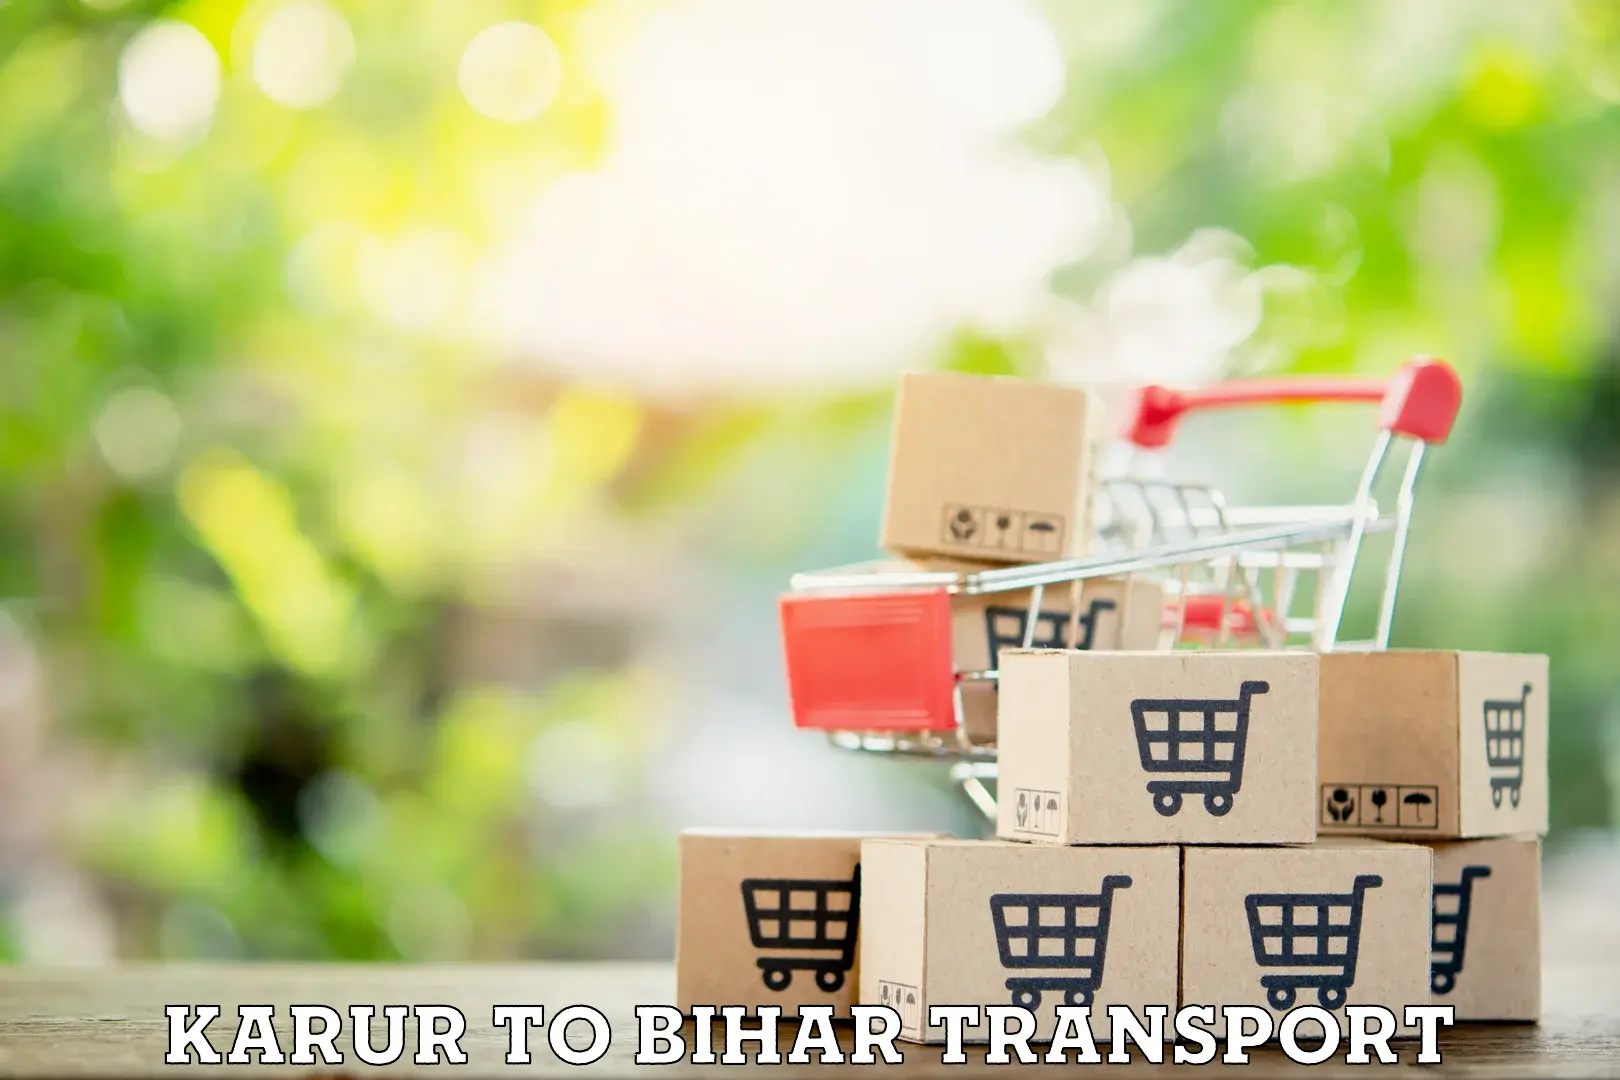 Container transport service Karur to Maheshkhunt